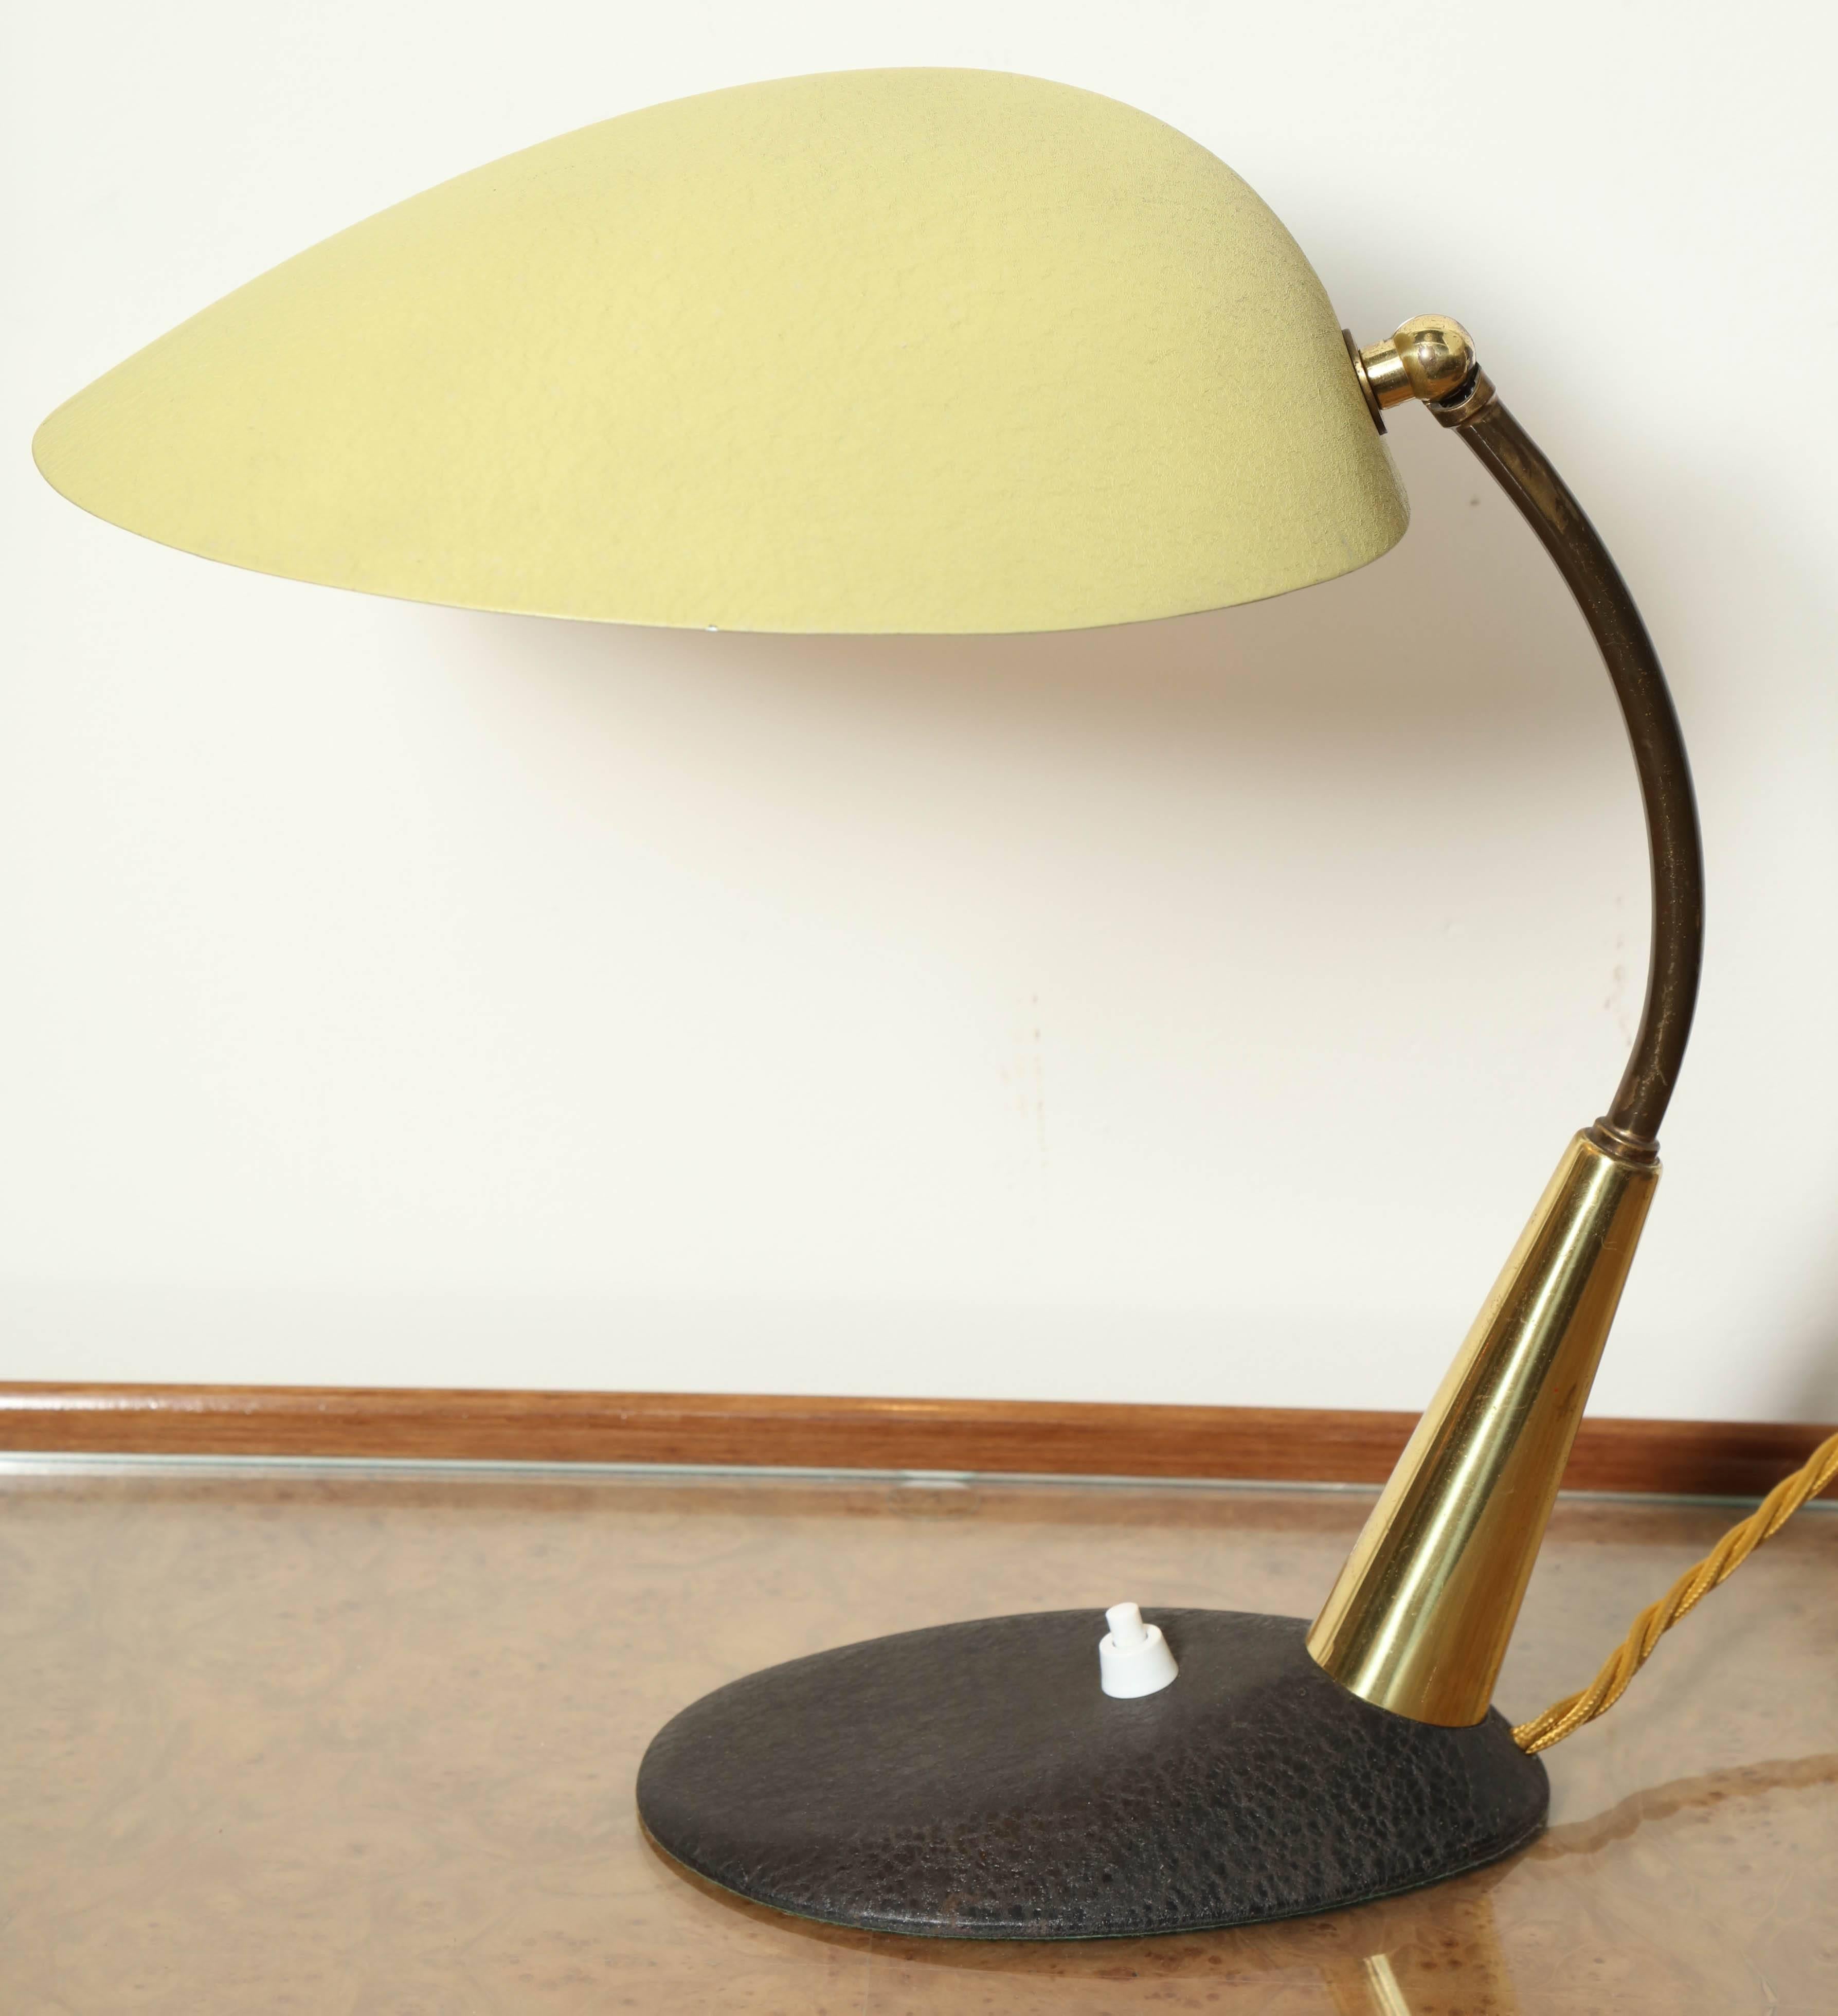 Modernist desk lamp made in Milan by Stilnovo in 1955, bright lemon yellow shade, does not show in this photo. Shade and base has a stippled surface. Adjustable shade.